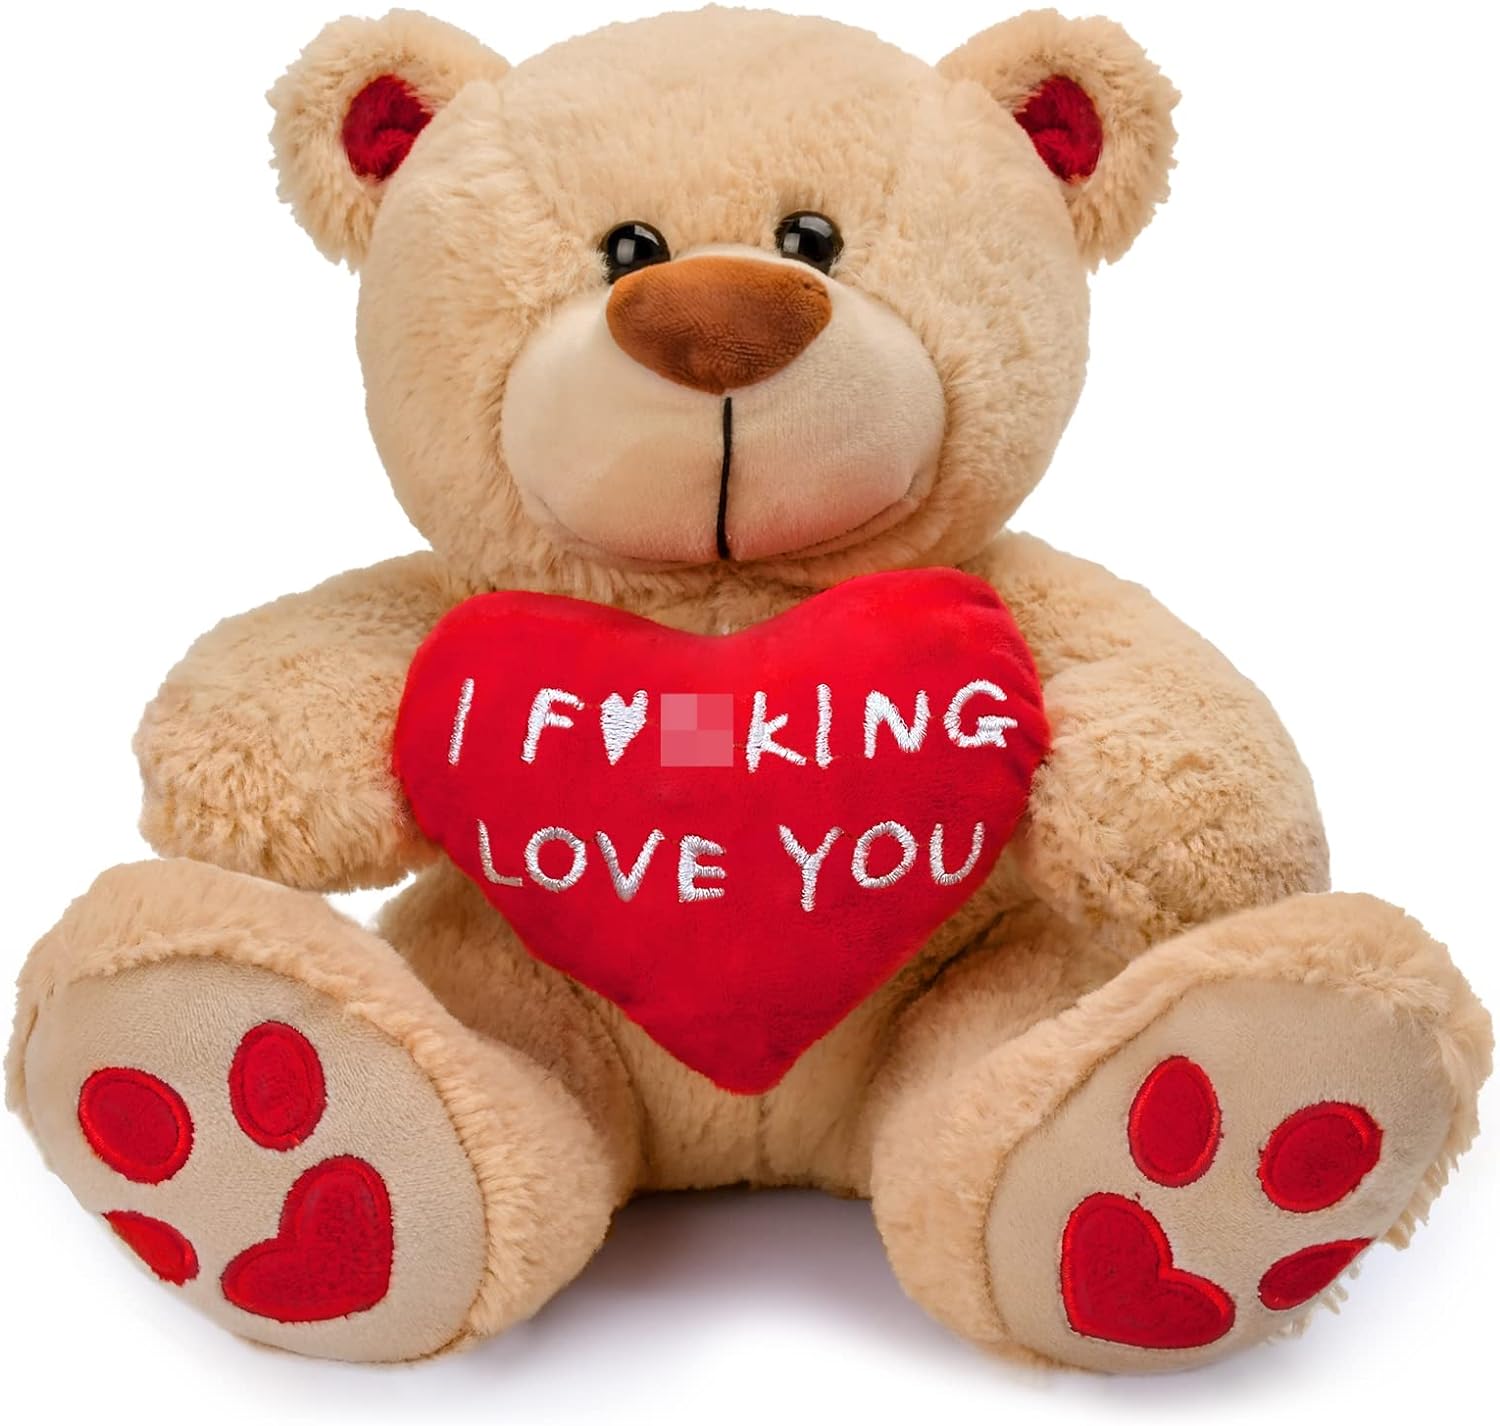 Sweet and Playful: 10-Inch Valentine's Day Teddy Bear